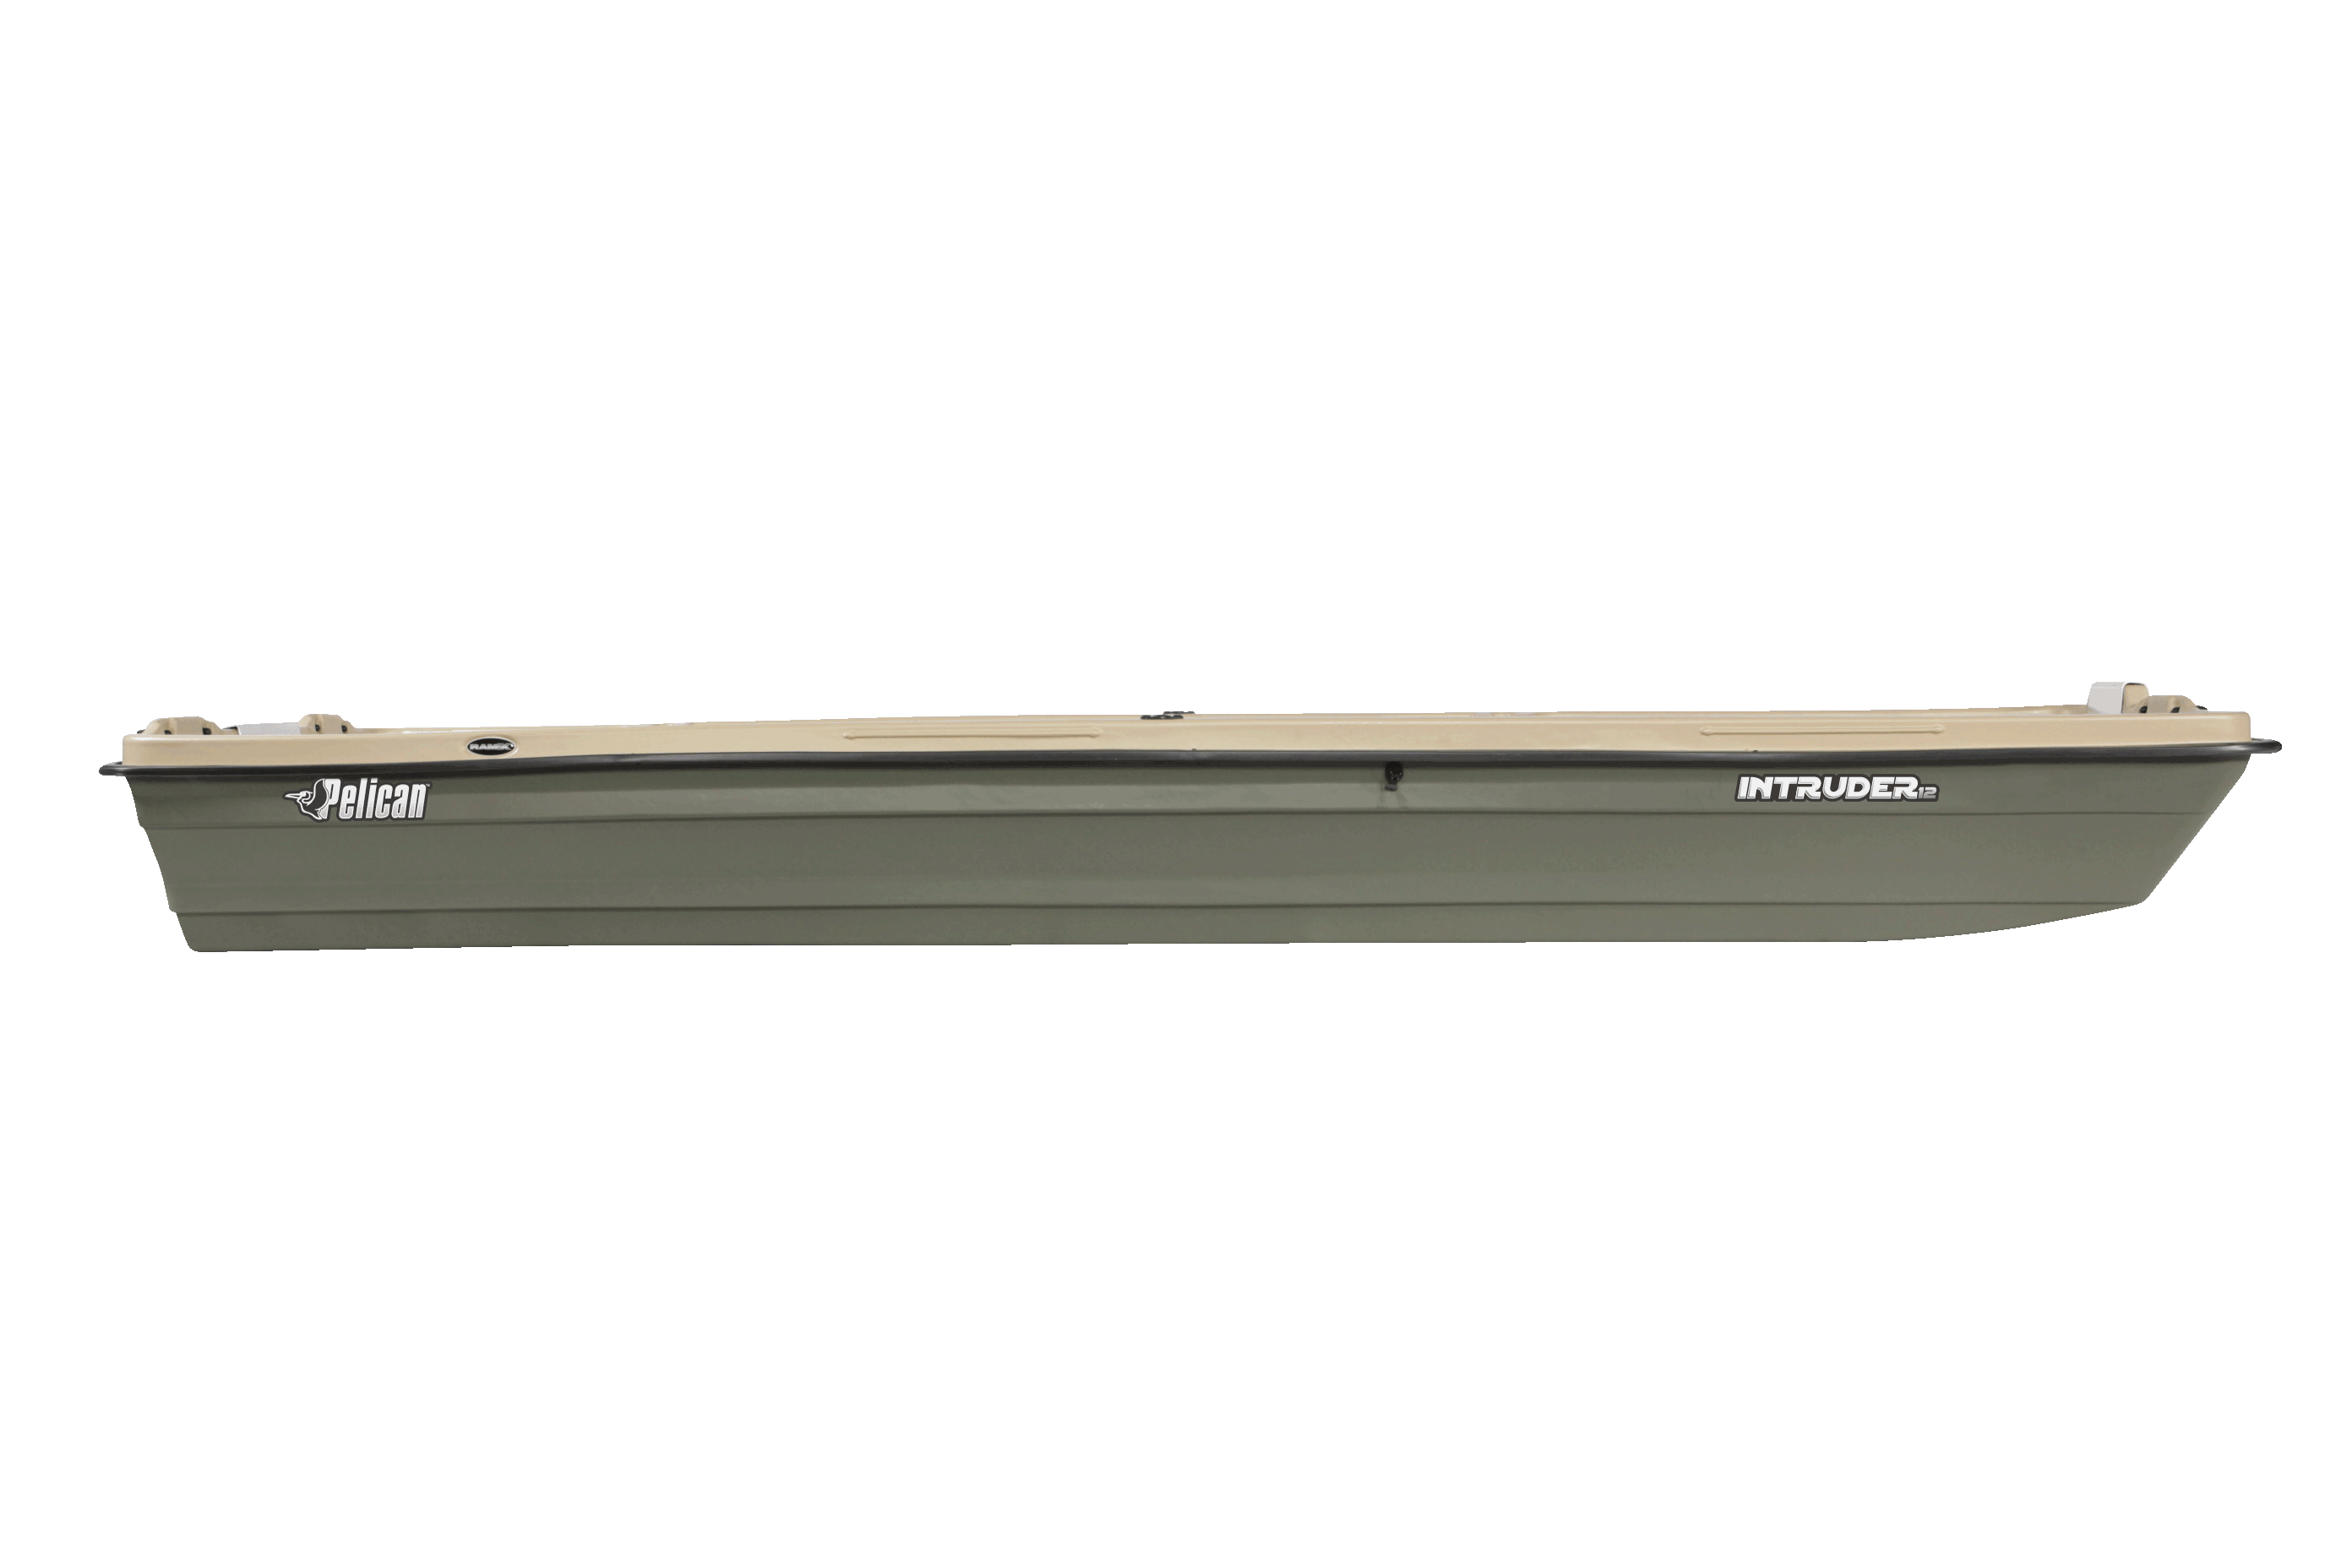 Pelican Boat Intruder 12 - Jon Fishing Boat - 12 ft - Great for Hunting and Fishing, Khaki/Beige - image 2 of 9